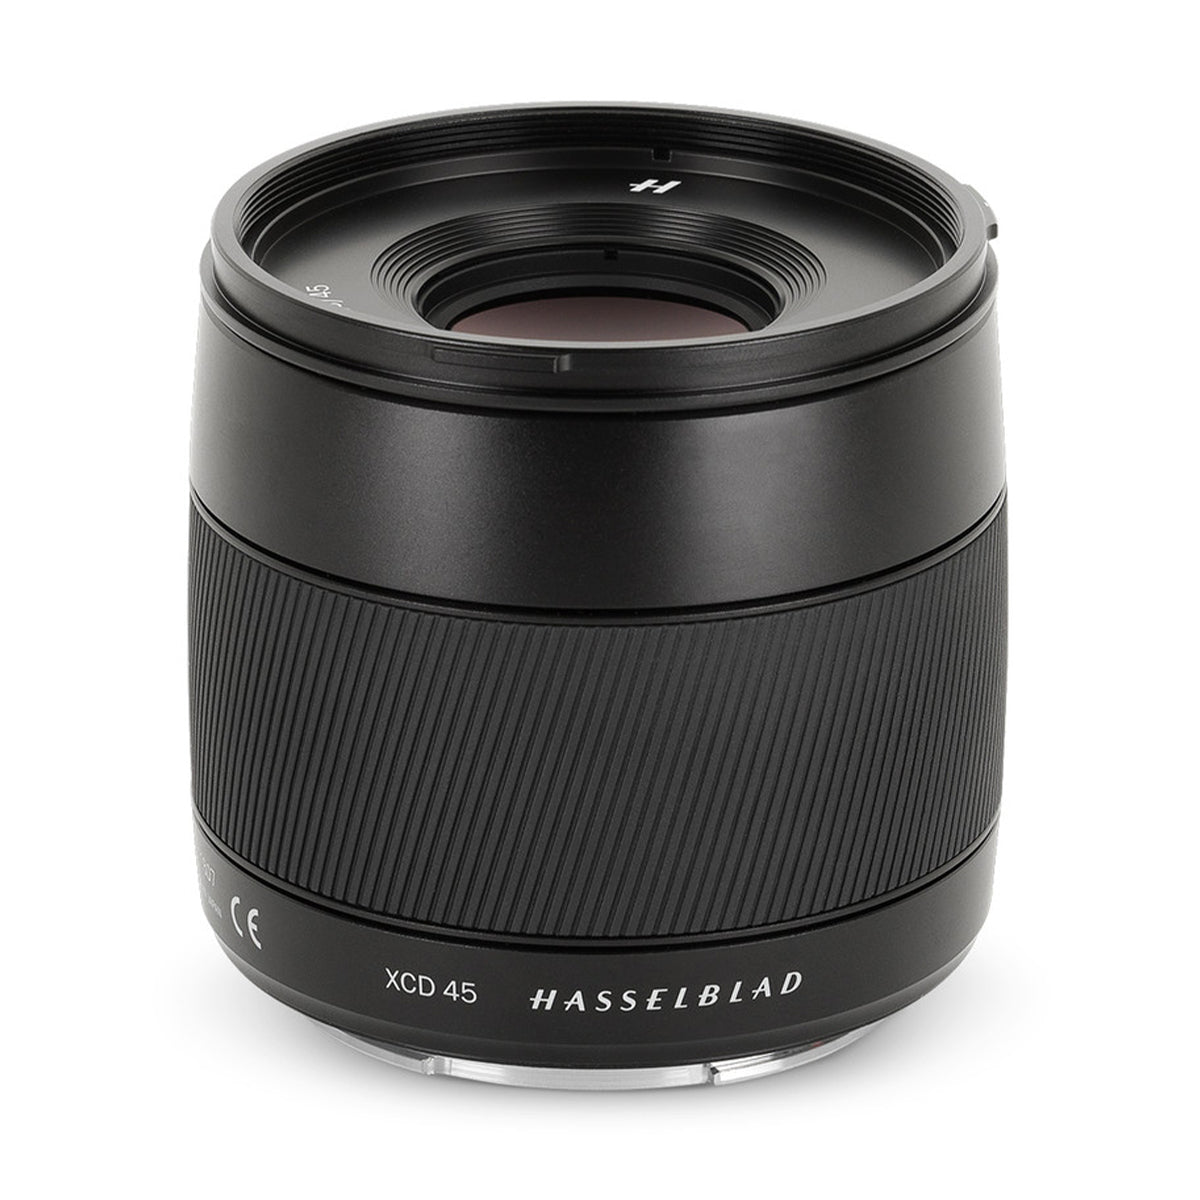 Hasselblad XCD 45mm f3.5 lens